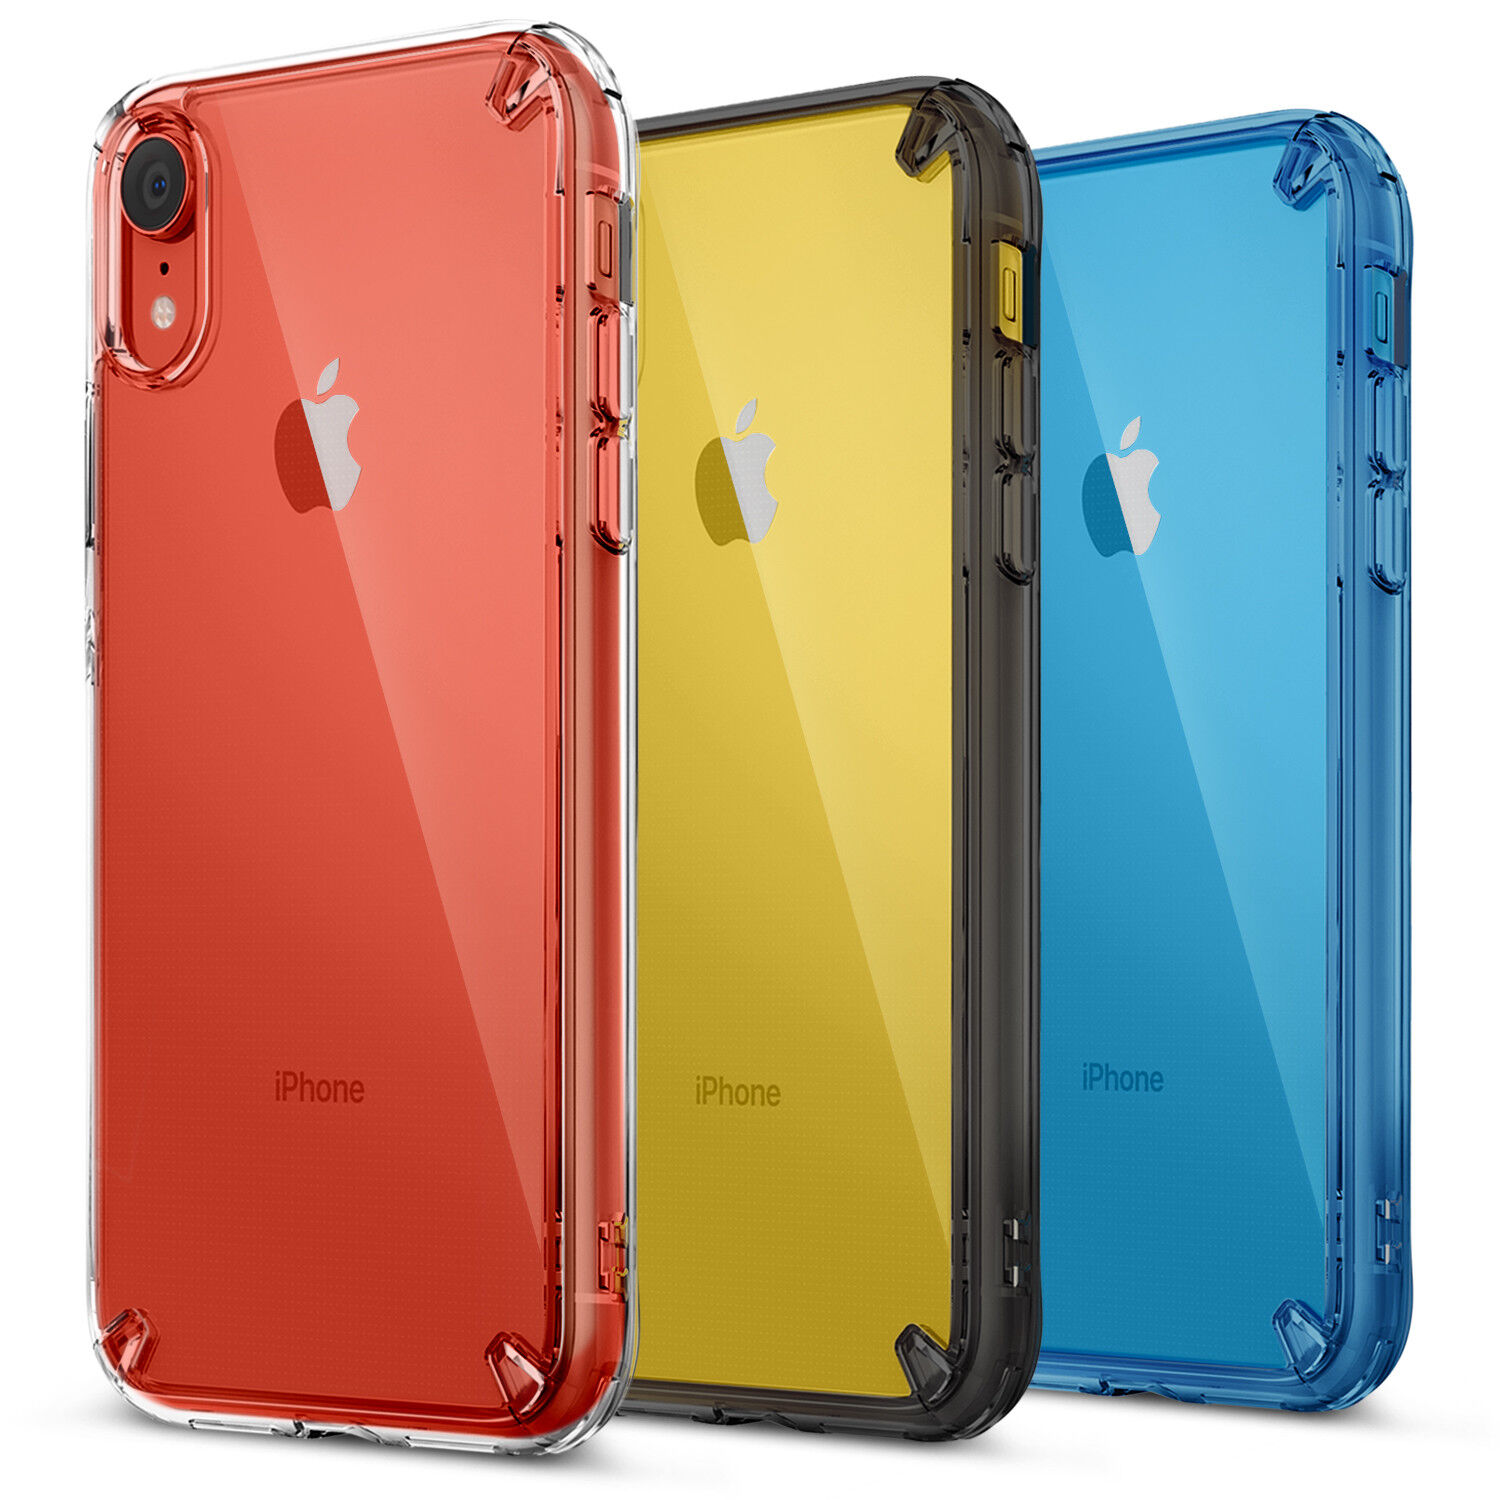 For iPhone X XS XR XS Max Ringke [FUSION] Clear Shockproof Protective Cover Case Ringke Apple iPhone X/XS/XR/XS Max Case - фотография #2